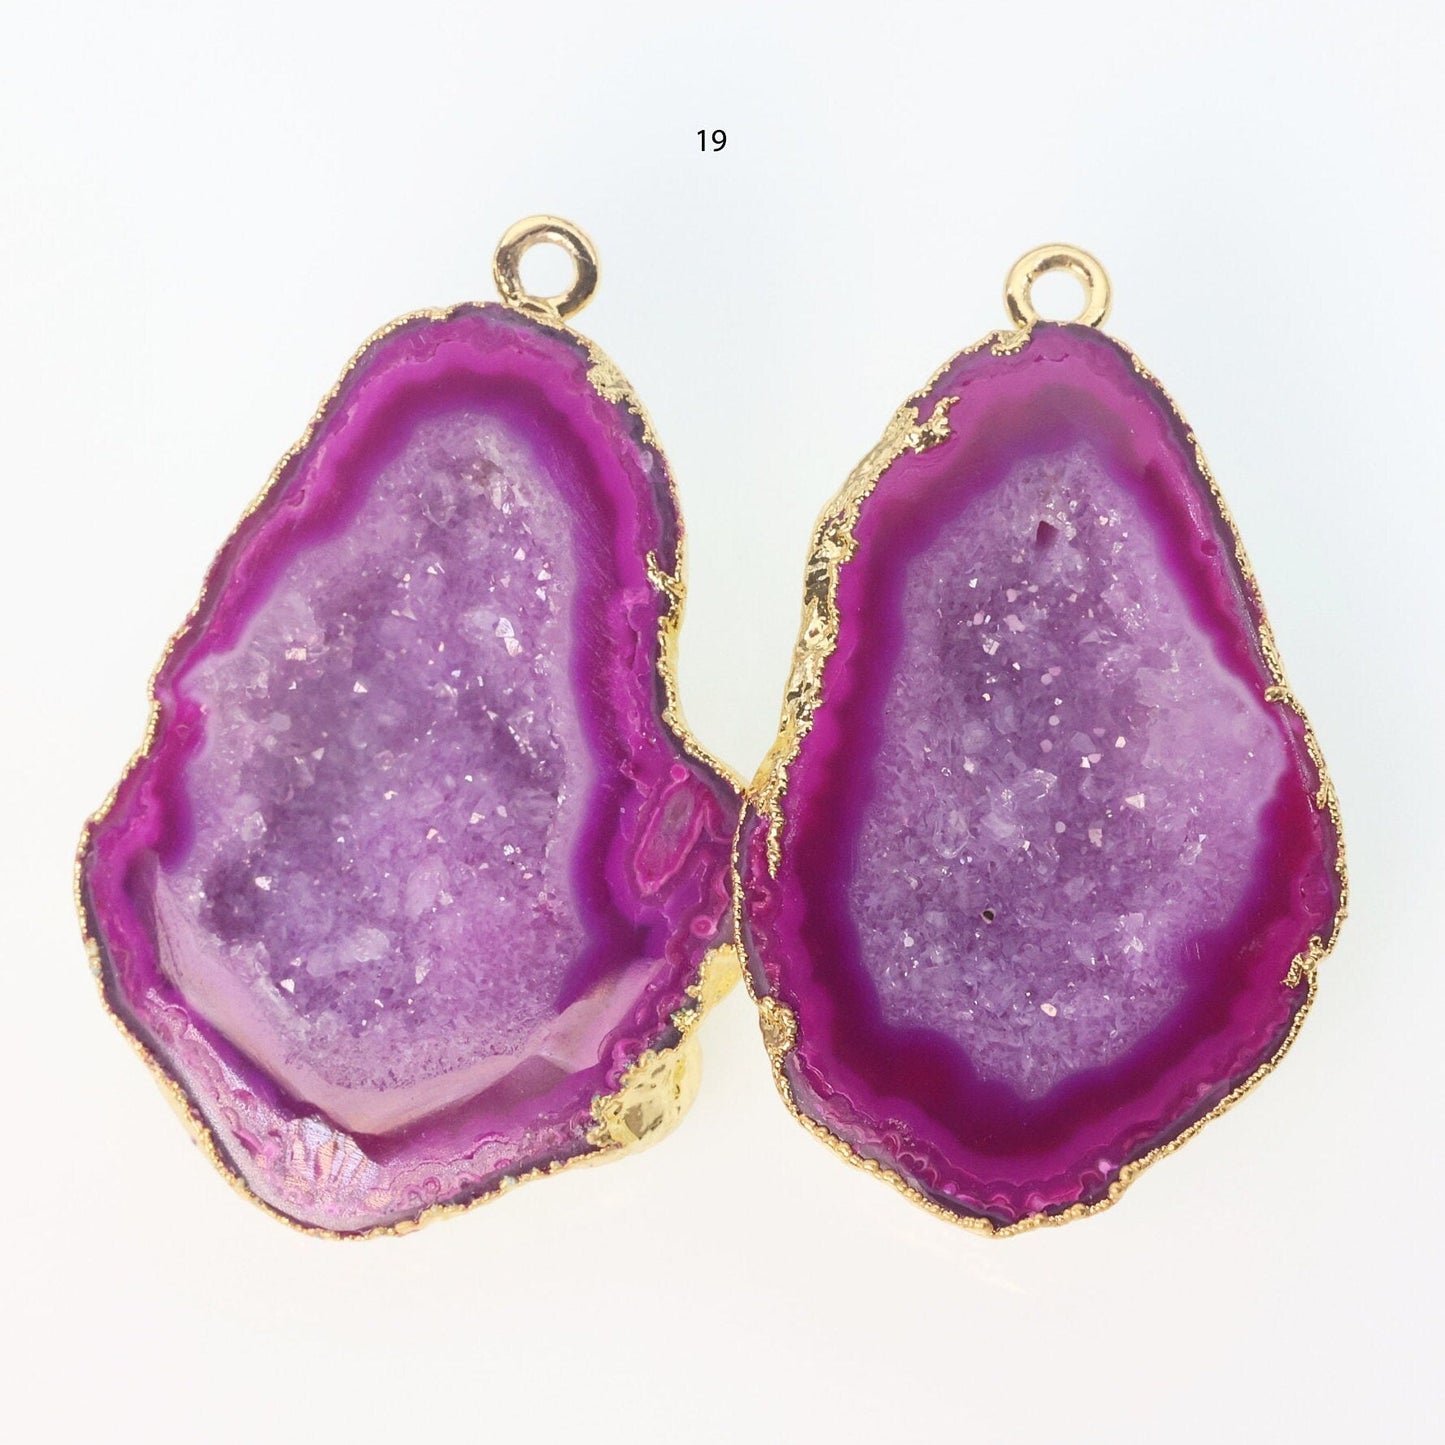 Gold Edged Fuscia cave druzy or tobasco druzy geode Pairs For Earrings *Order Exact Pairs as in Photos* - Meena Design